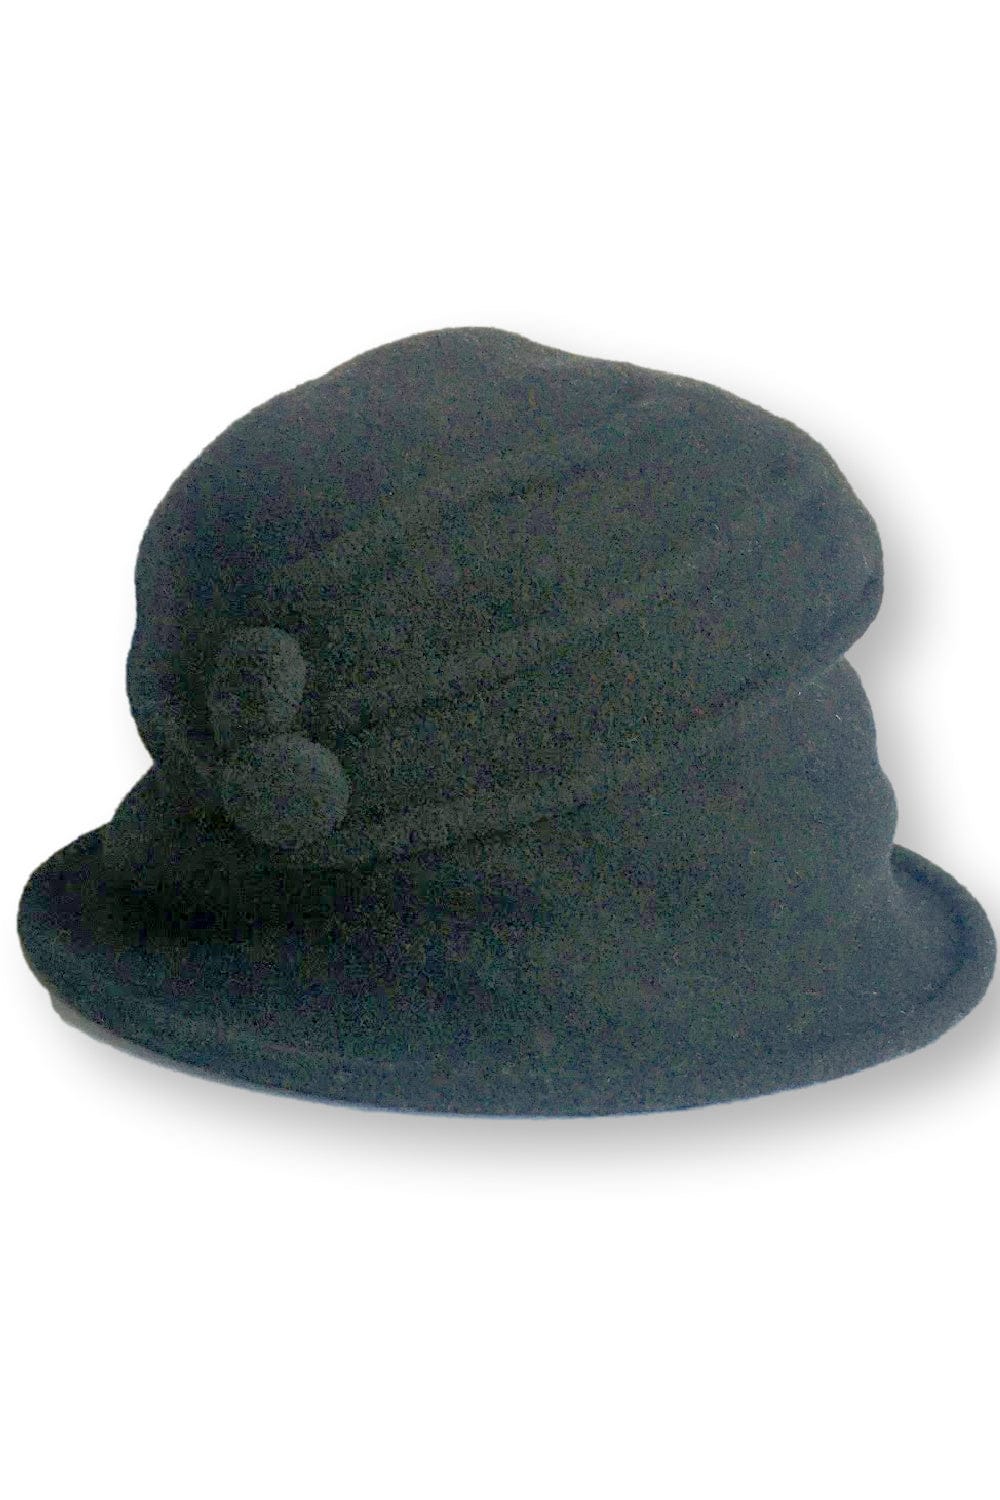 Women's Merino Wool Hat with pleat detail and 2 side buttons. Hat is black color.